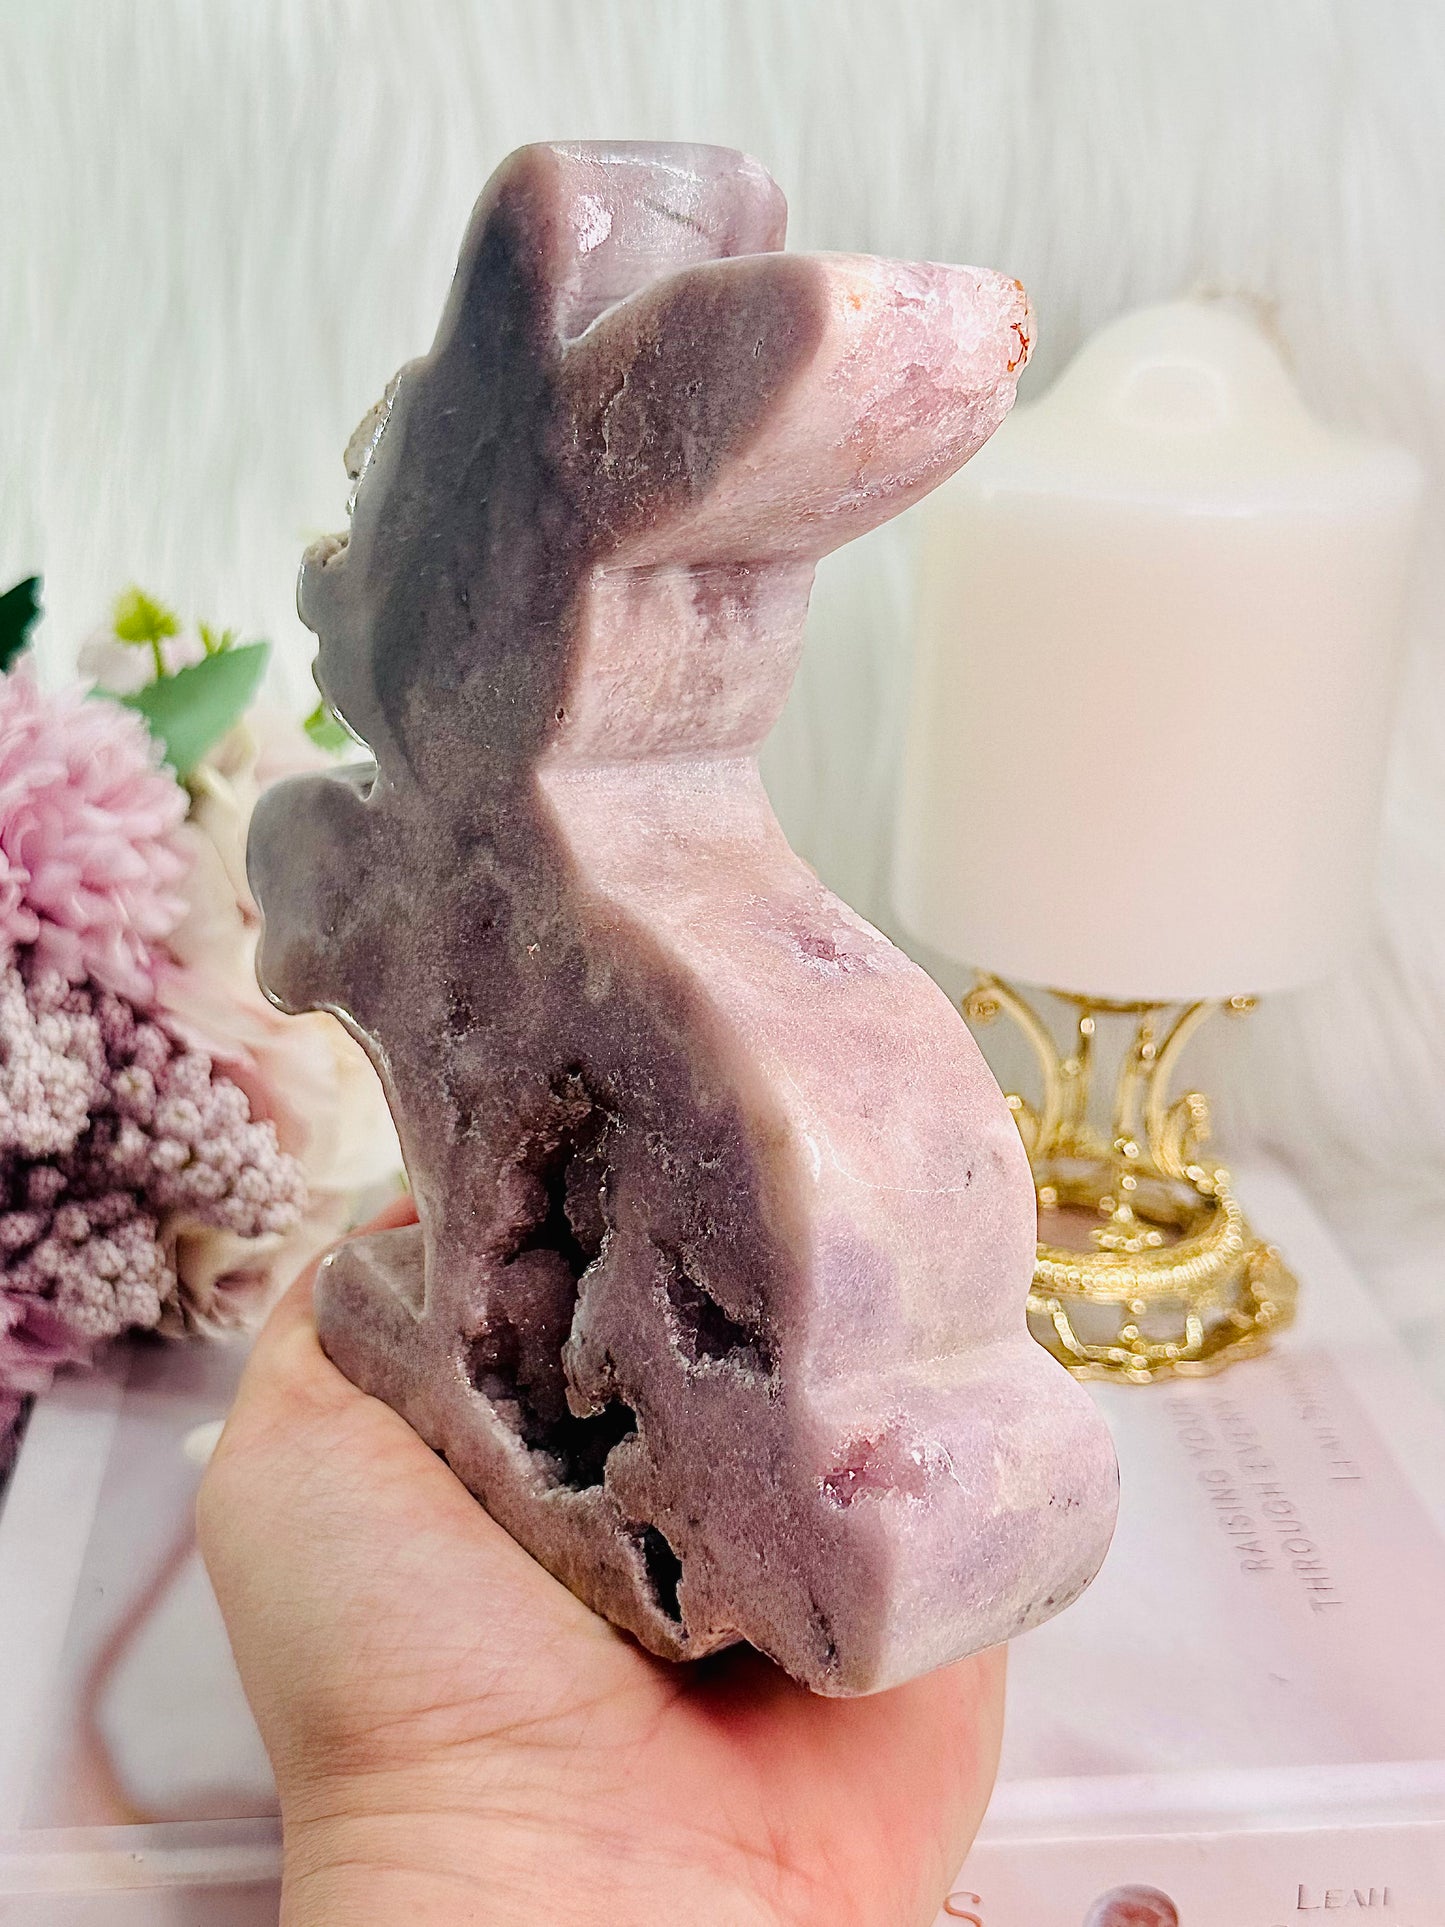 The Ultimate Bunny Rabbit!!! Absolutely Incredible Large Perfectly Carved Pink Amethyst Druzy Bunny Rabbit 739grams Of Perfection